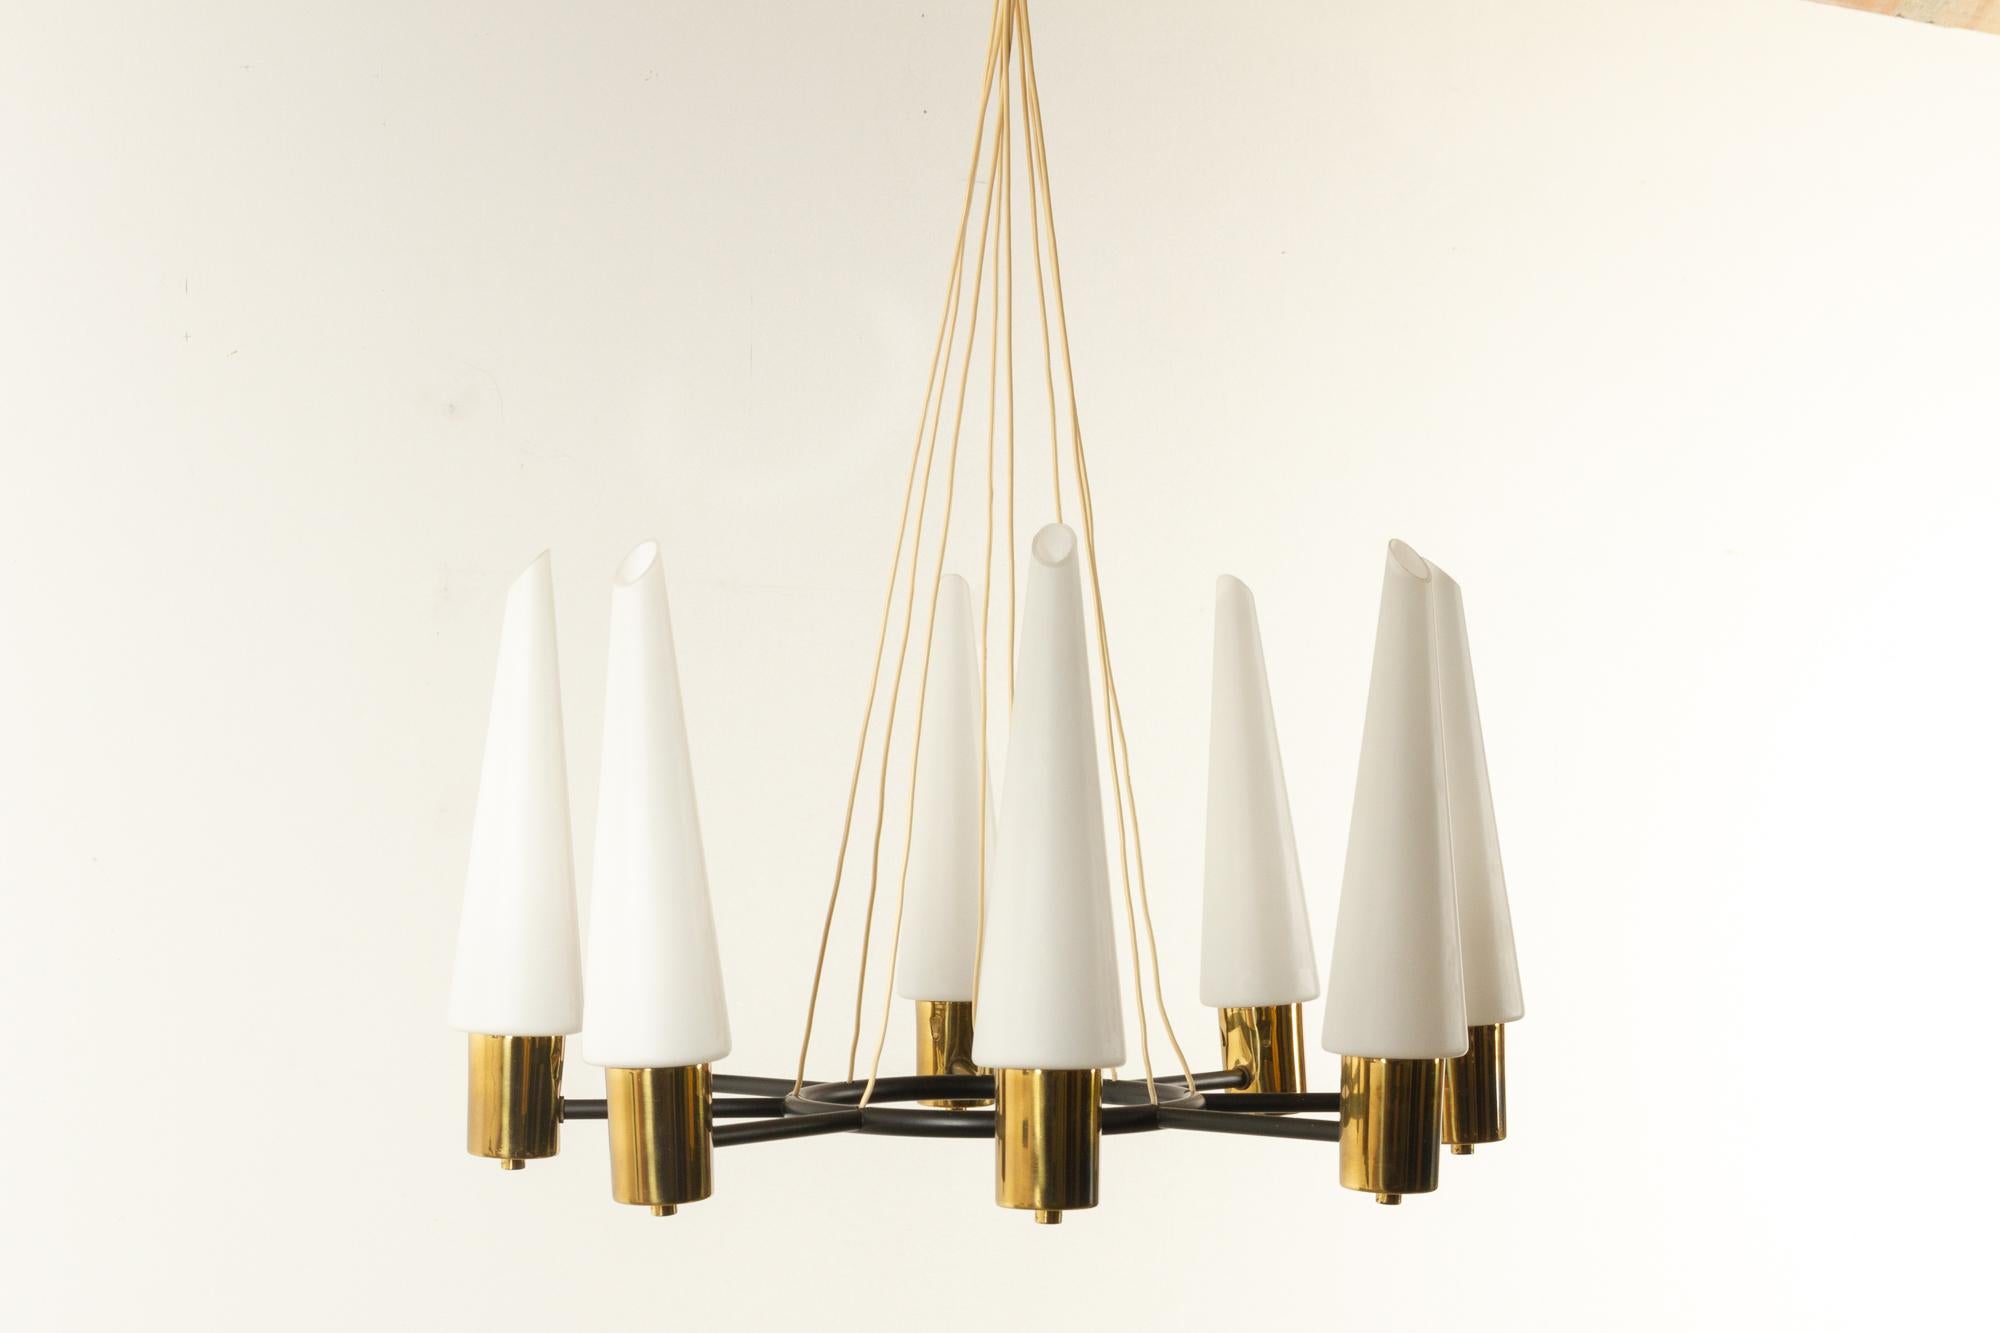 Vintage Midcentury Brass Chandelier with Opal Glass Shades, 1960s For Sale 2